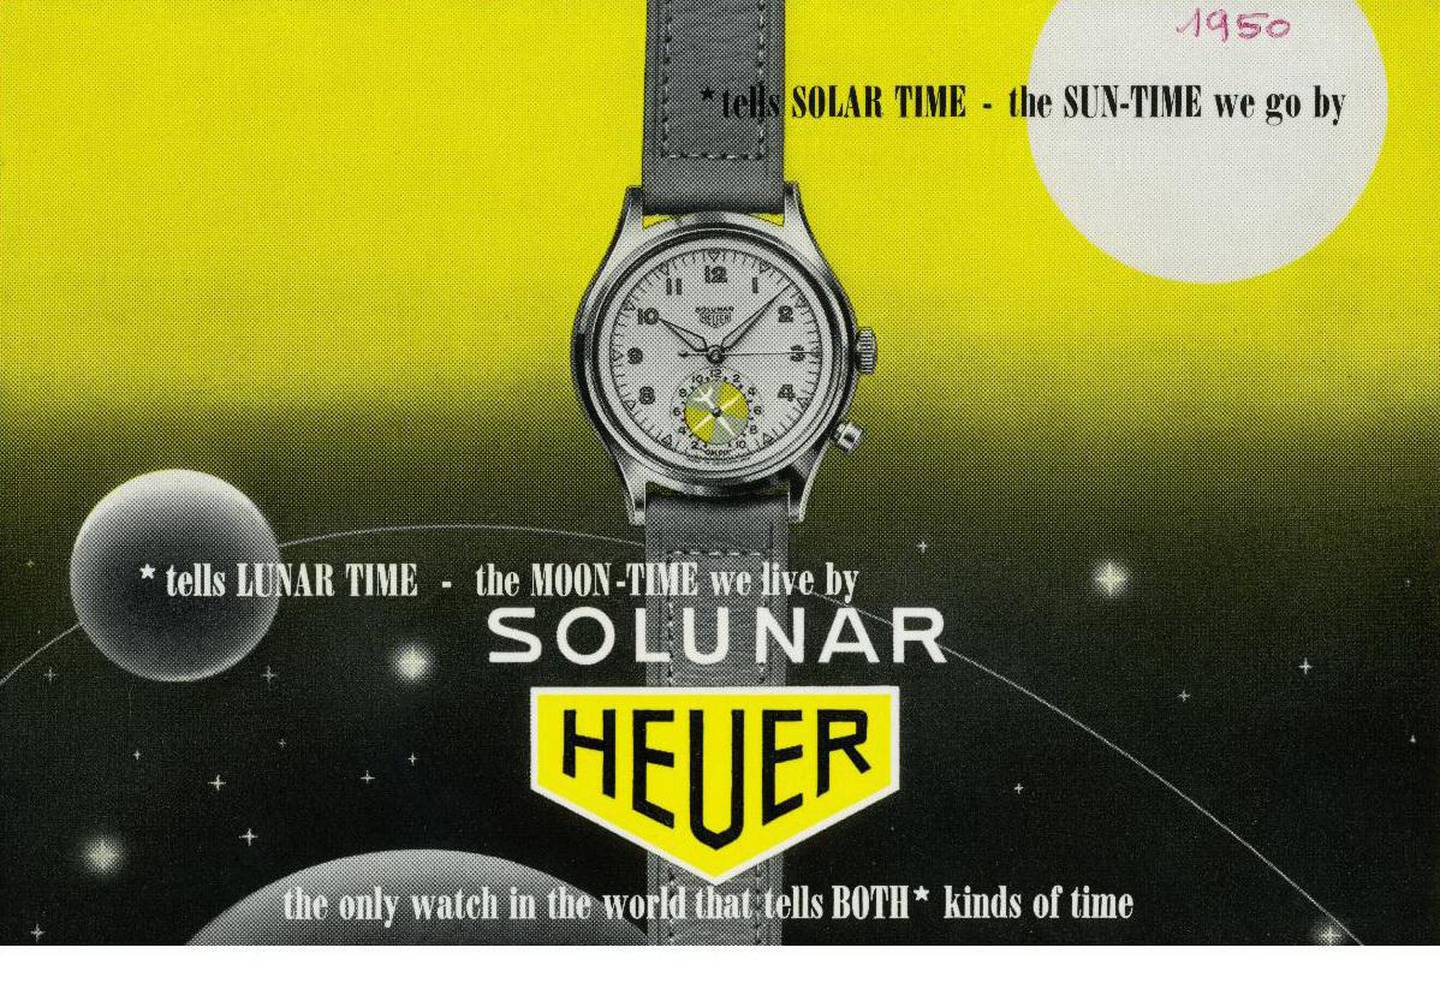 Poster for the TAG Heuer 1950 Solunar watch. Courtesy TAG Heuer